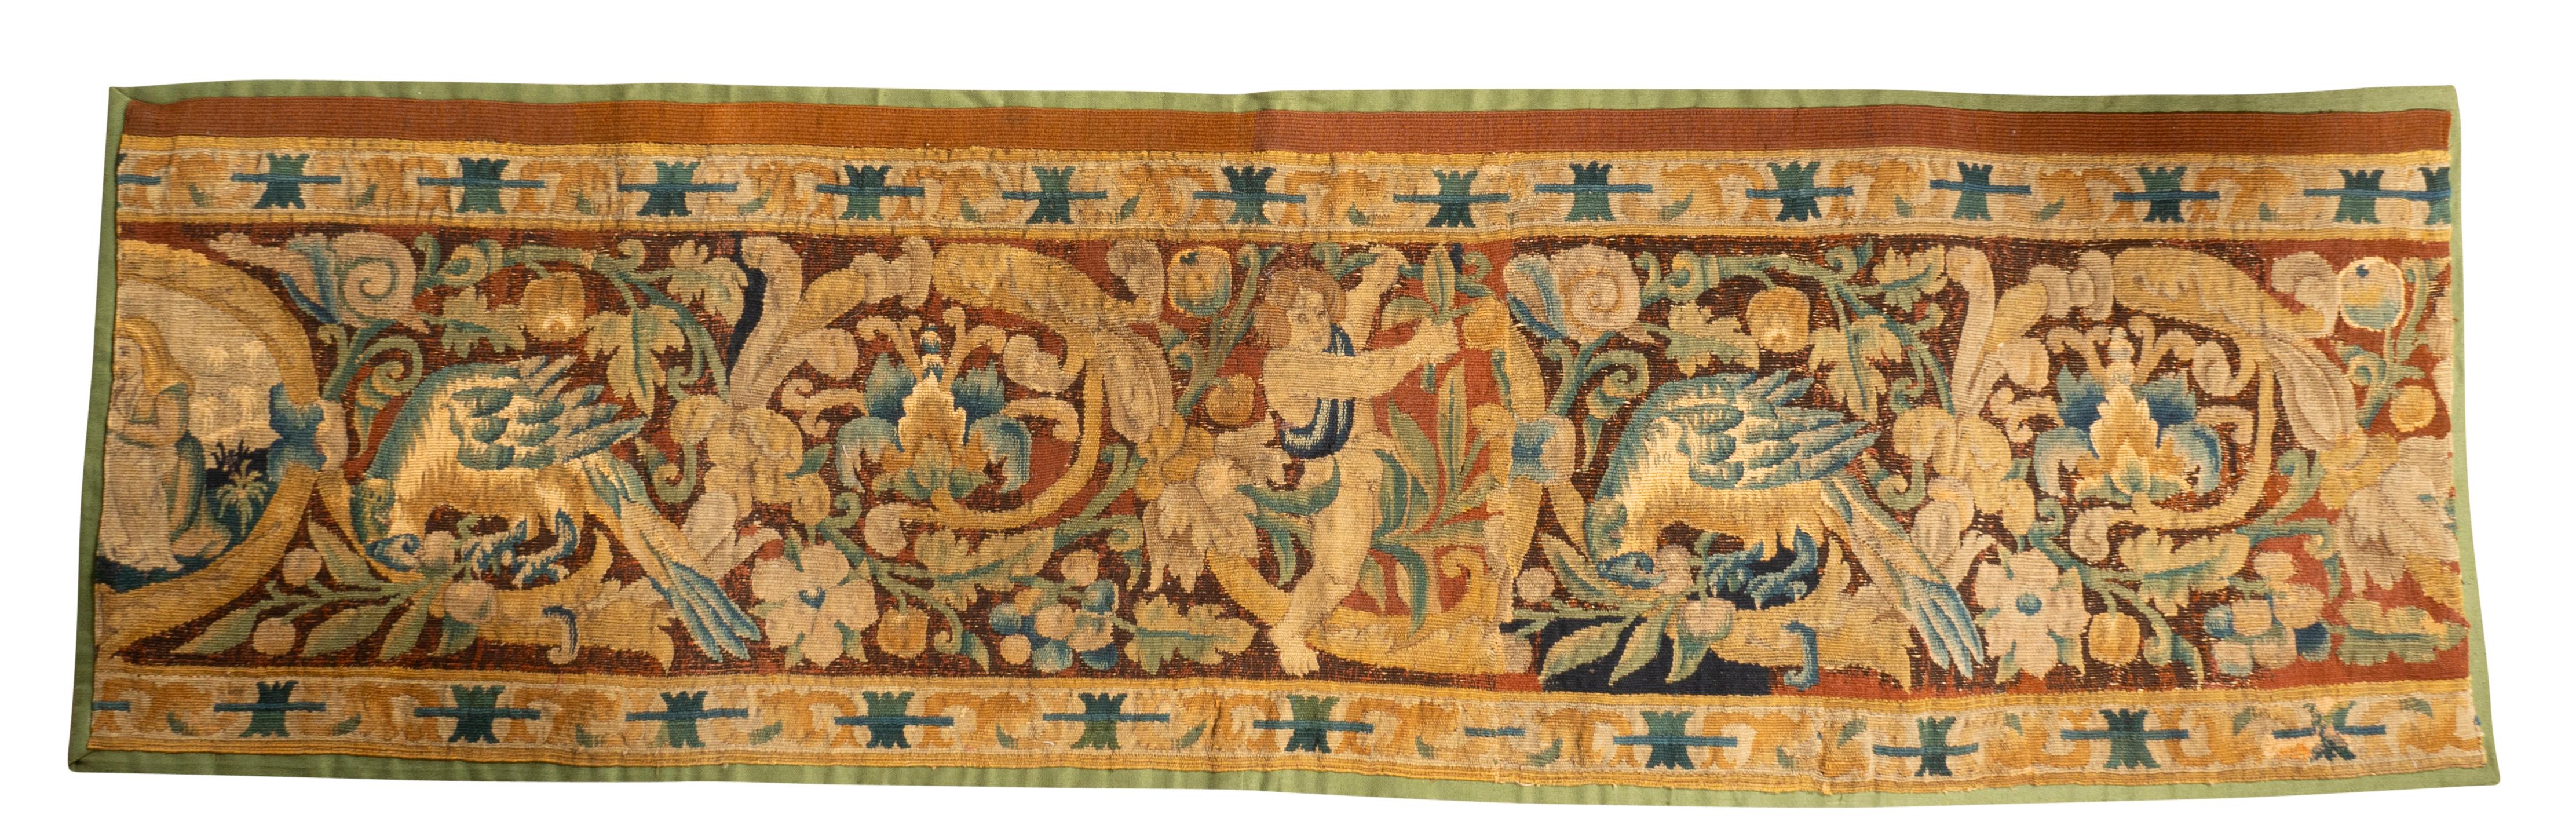 With scrolling acanthus leaves with birds and cherubs. Originally the border for a large tapestry. From the estate of JP Morgan Jr acquired directly from the heirs.